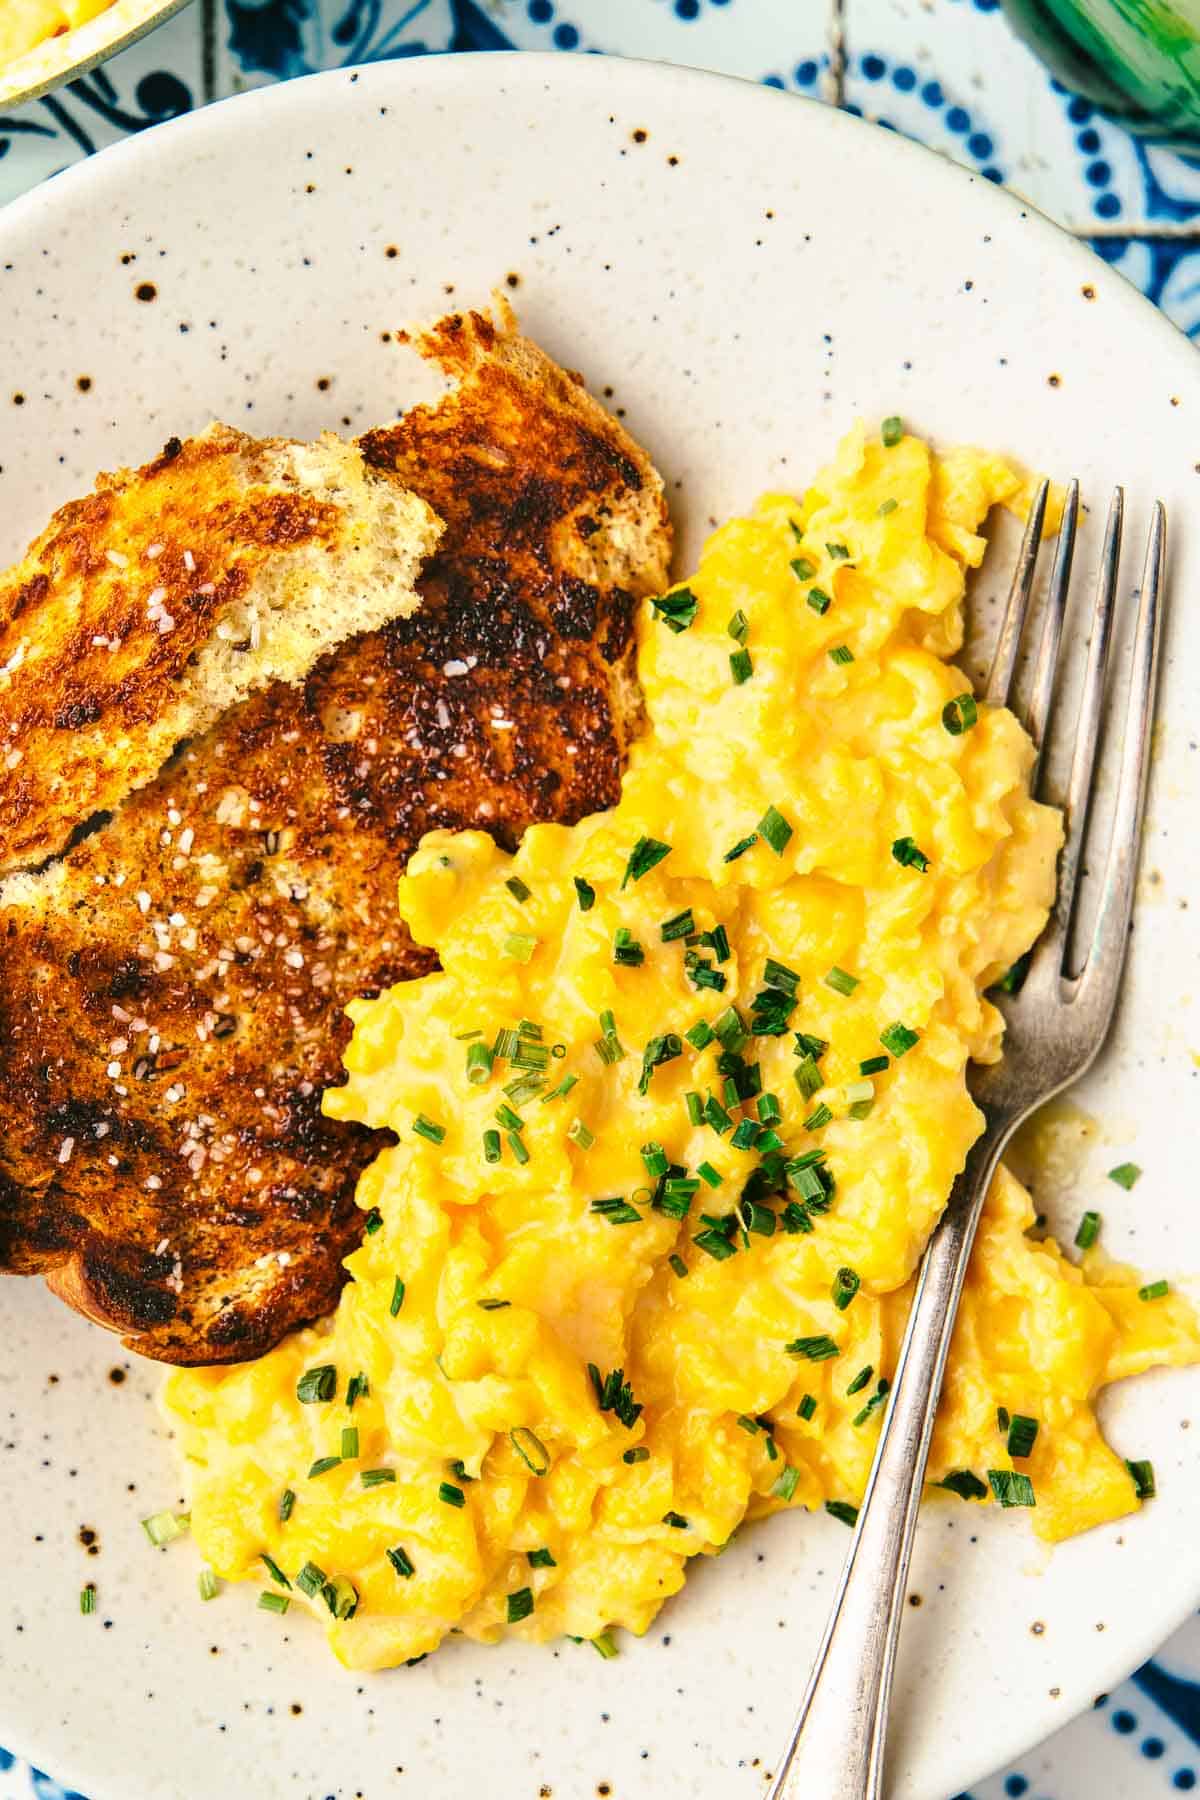 The BEST Soft And Creamy Scrambled Eggs